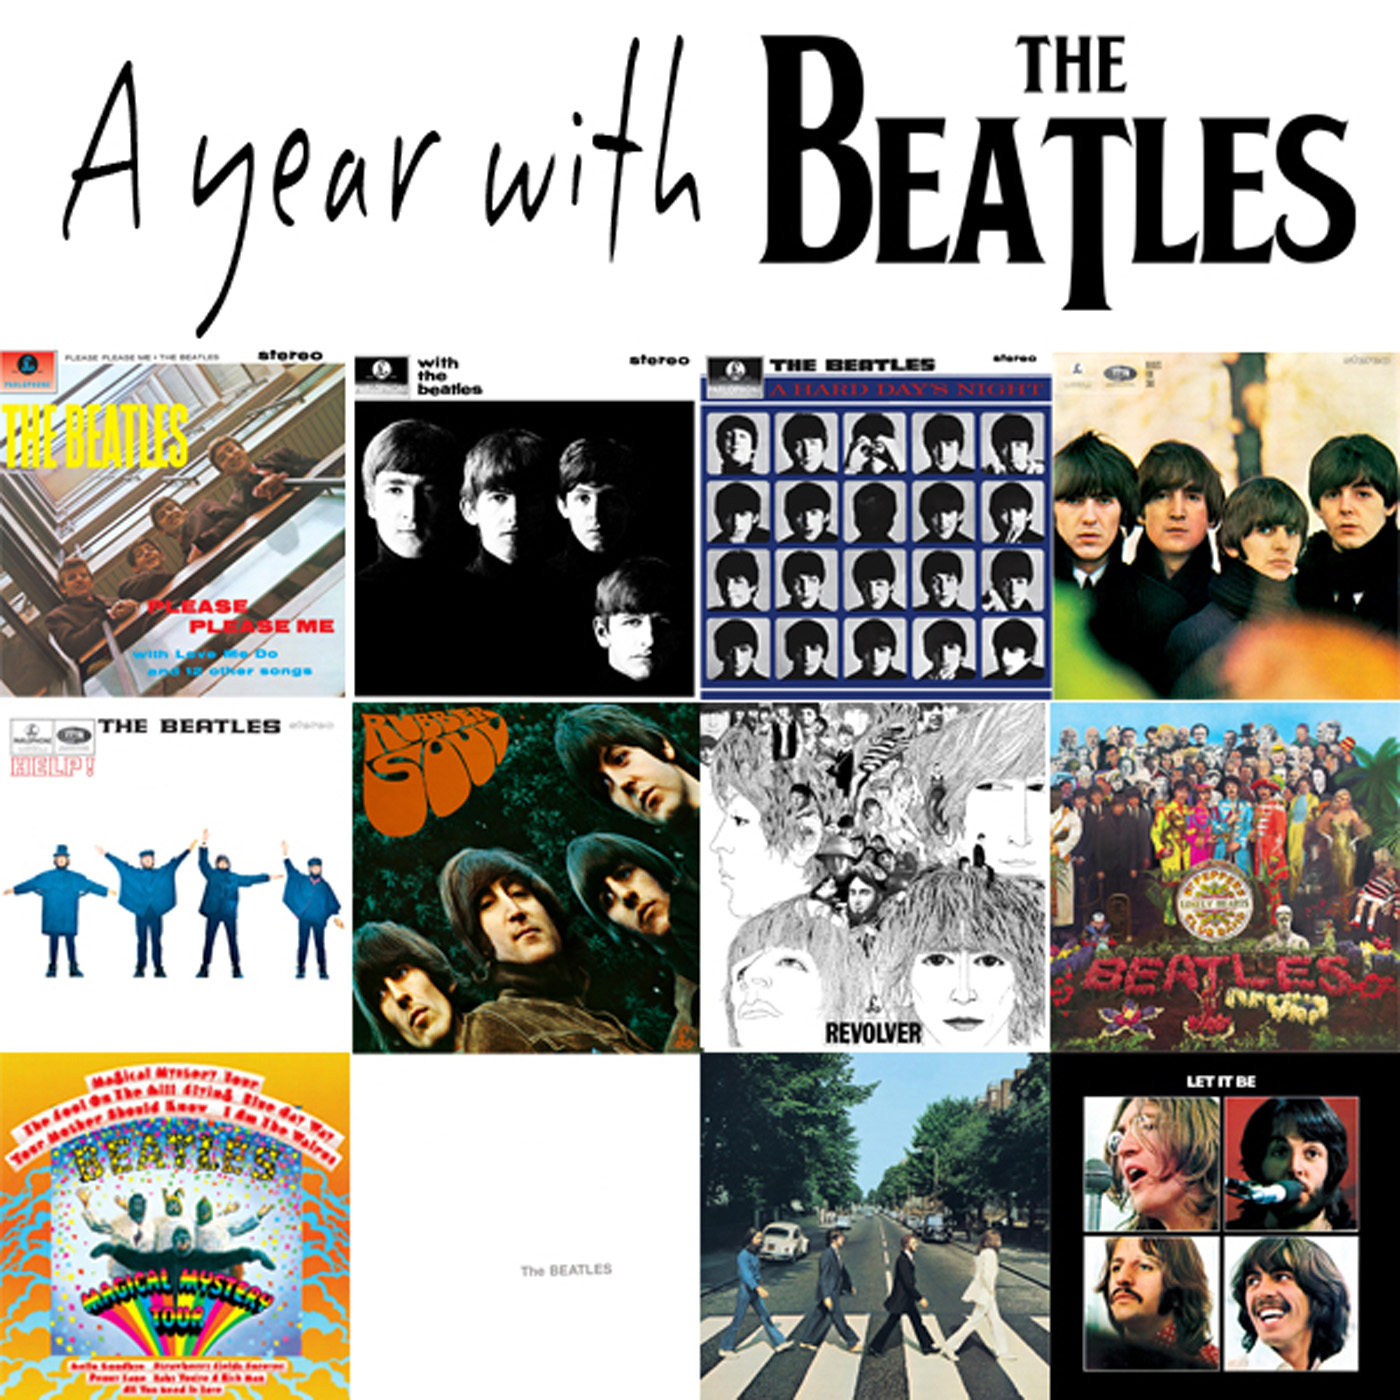 A Year With The Beatles